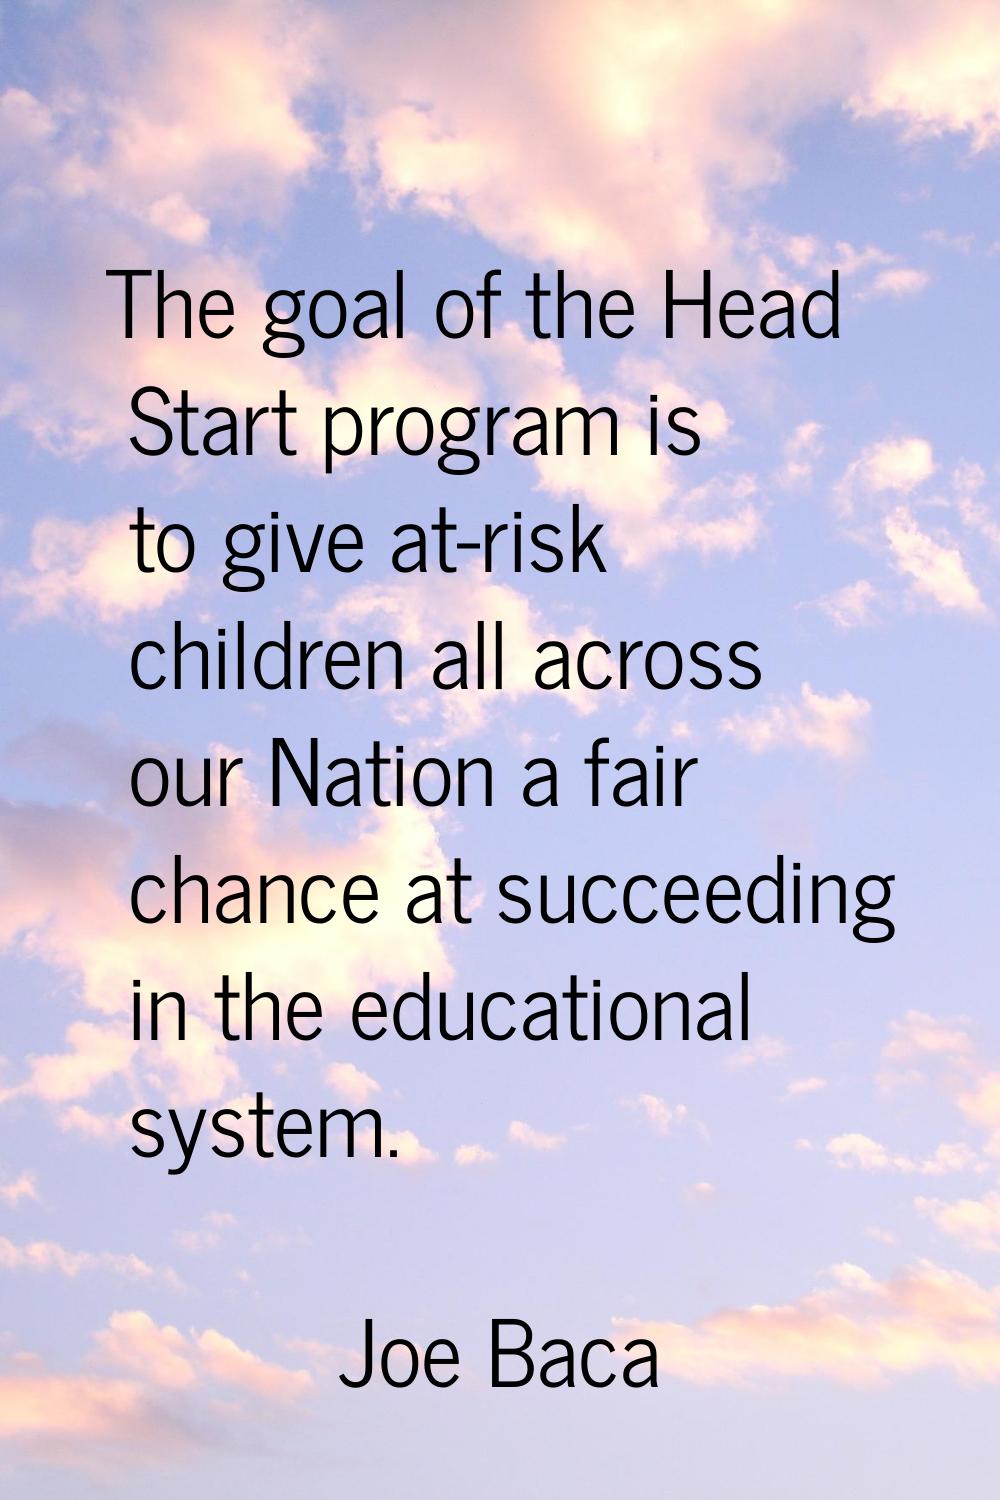 The goal of the Head Start program is to give at-risk children all across our Nation a fair chance 